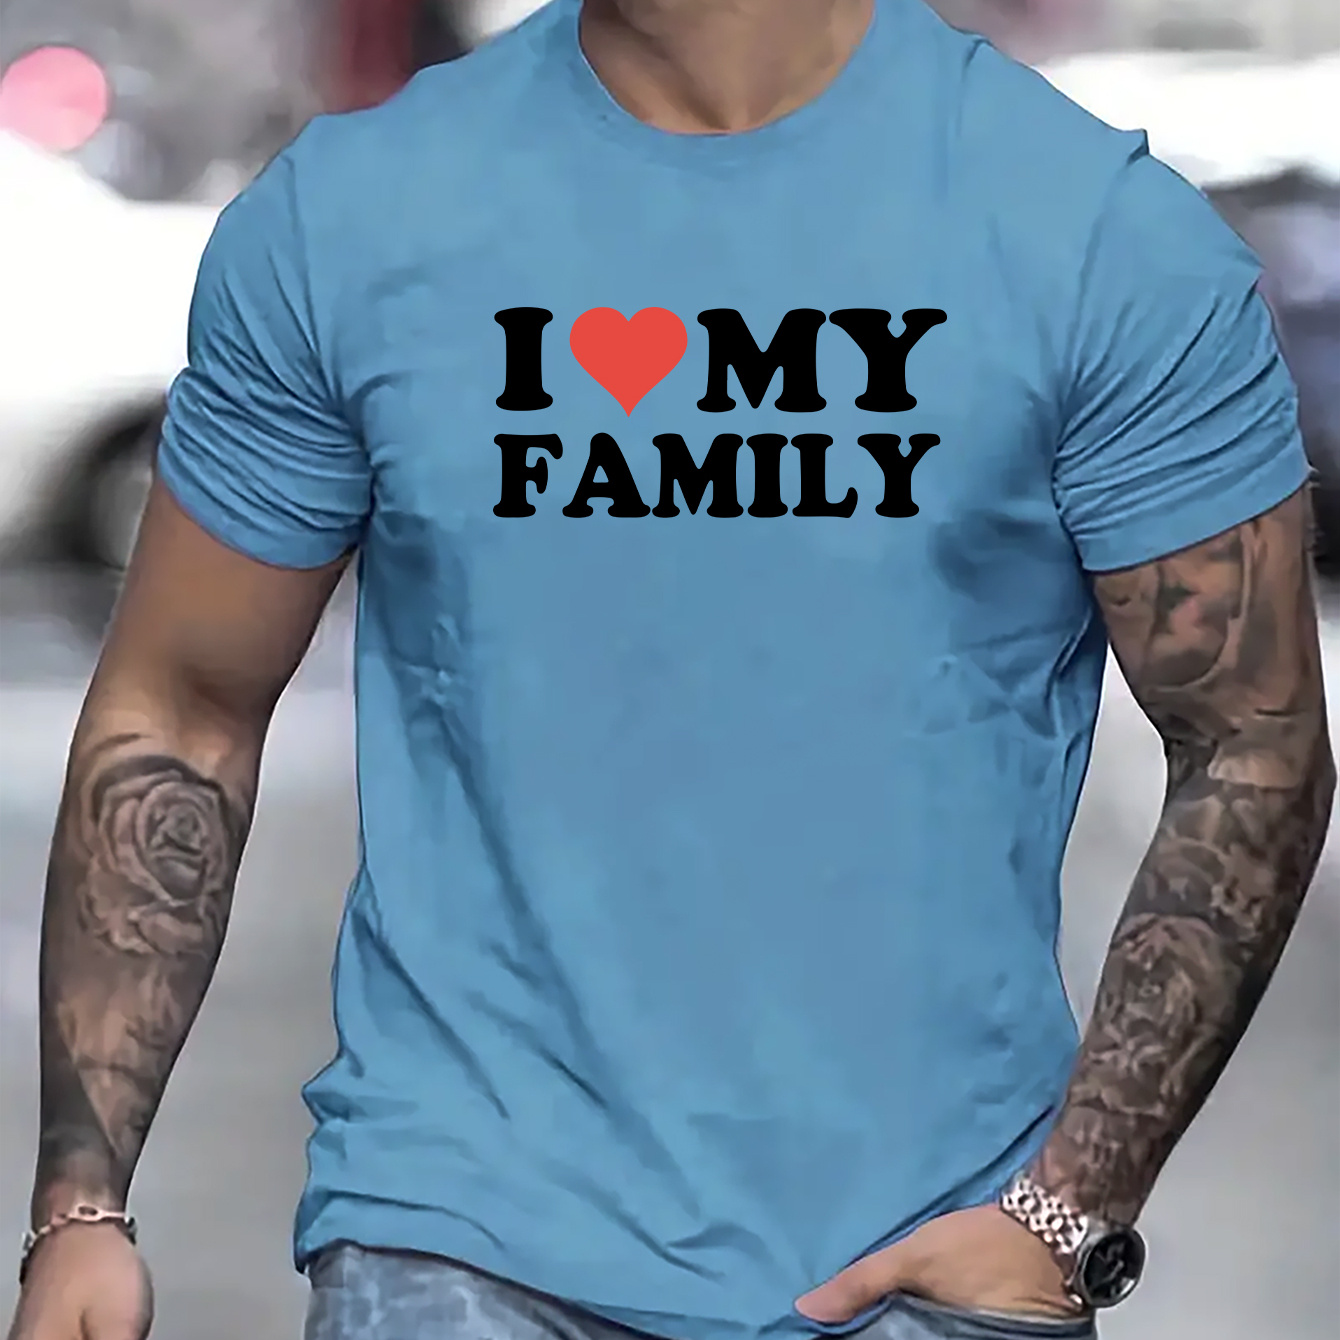 

I Love My Family And Heart Graphic Print, Men's Novel Graphic Design T-shirt, Casual Comfy Tees For Summer, Men's Clothing Tops For Daily Activities